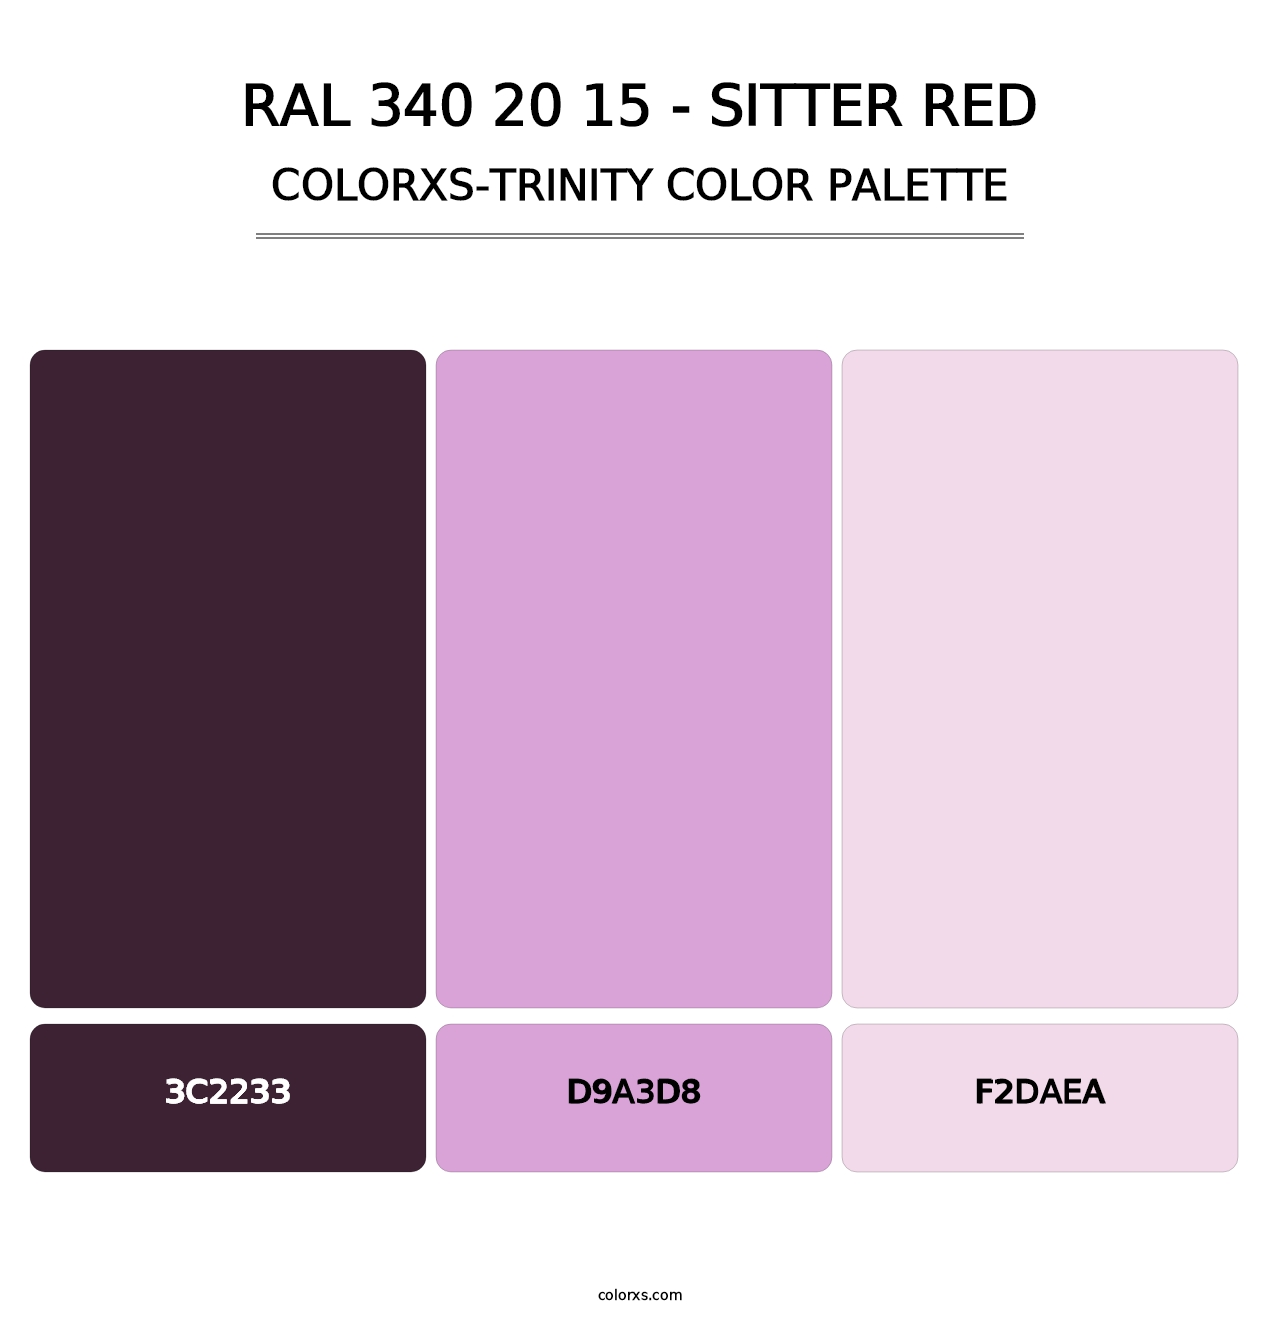 RAL 340 20 15 - Sitter Red - Colorxs Trinity Palette